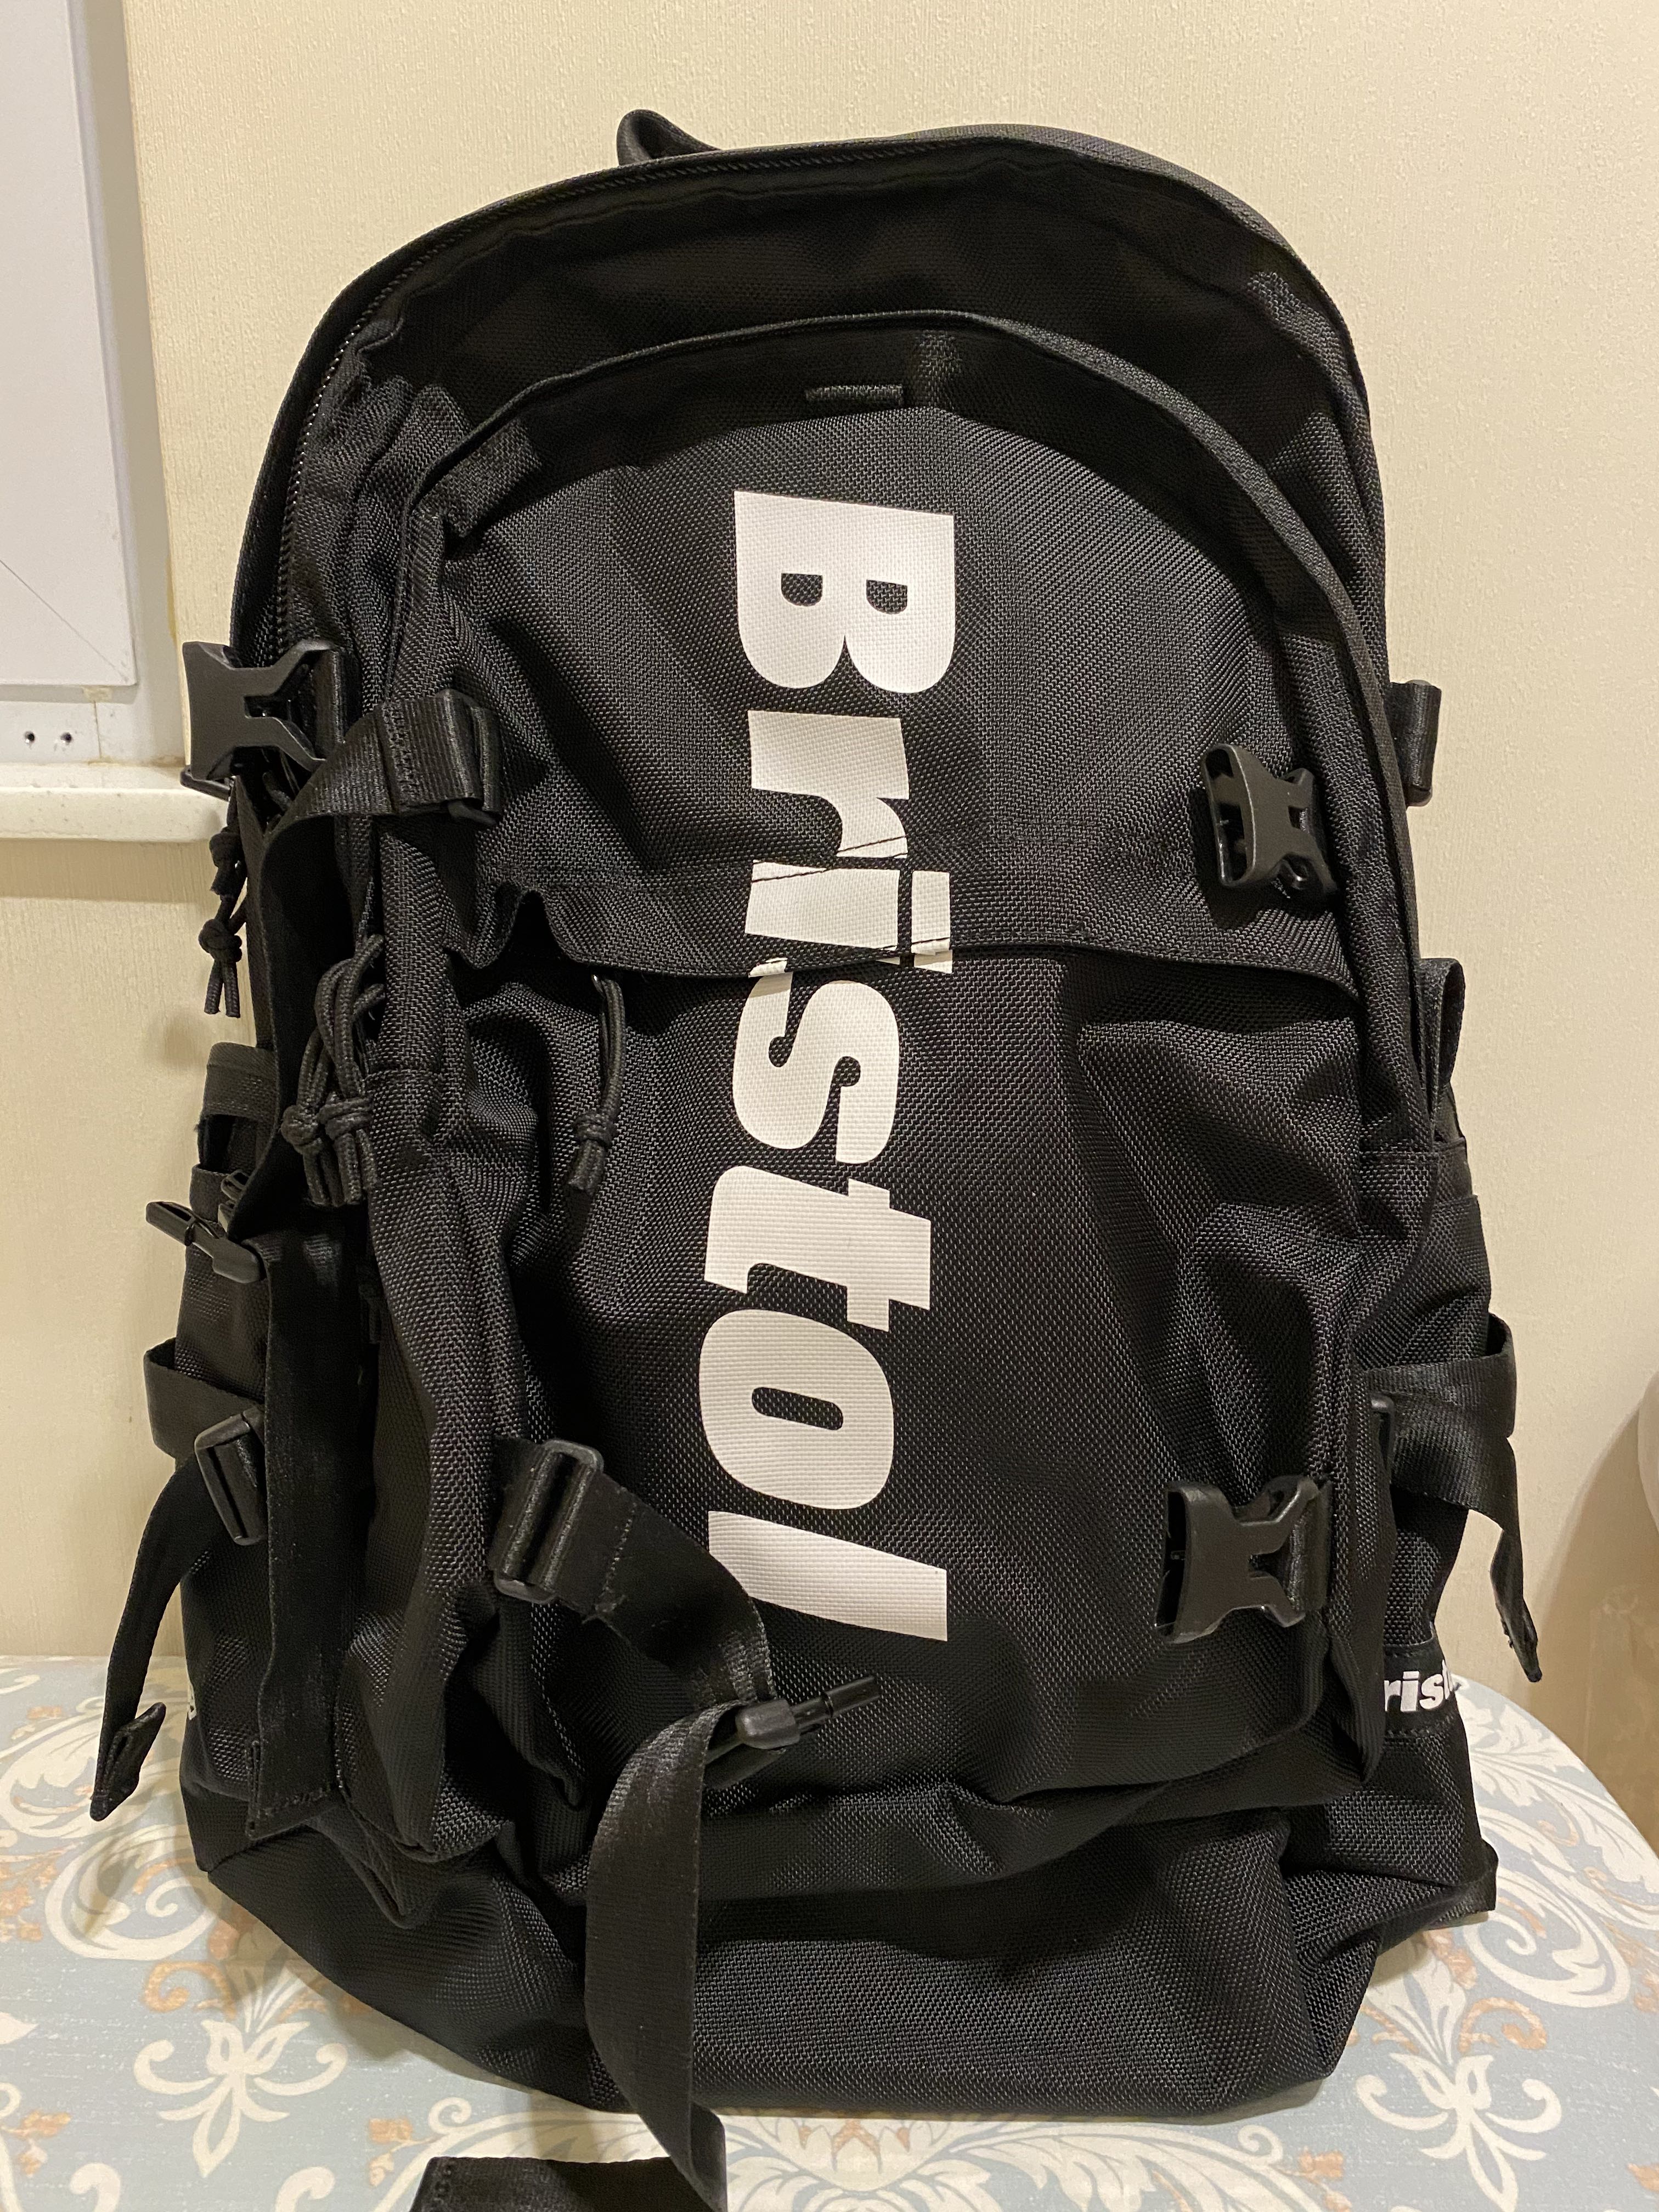 FCRB backpack